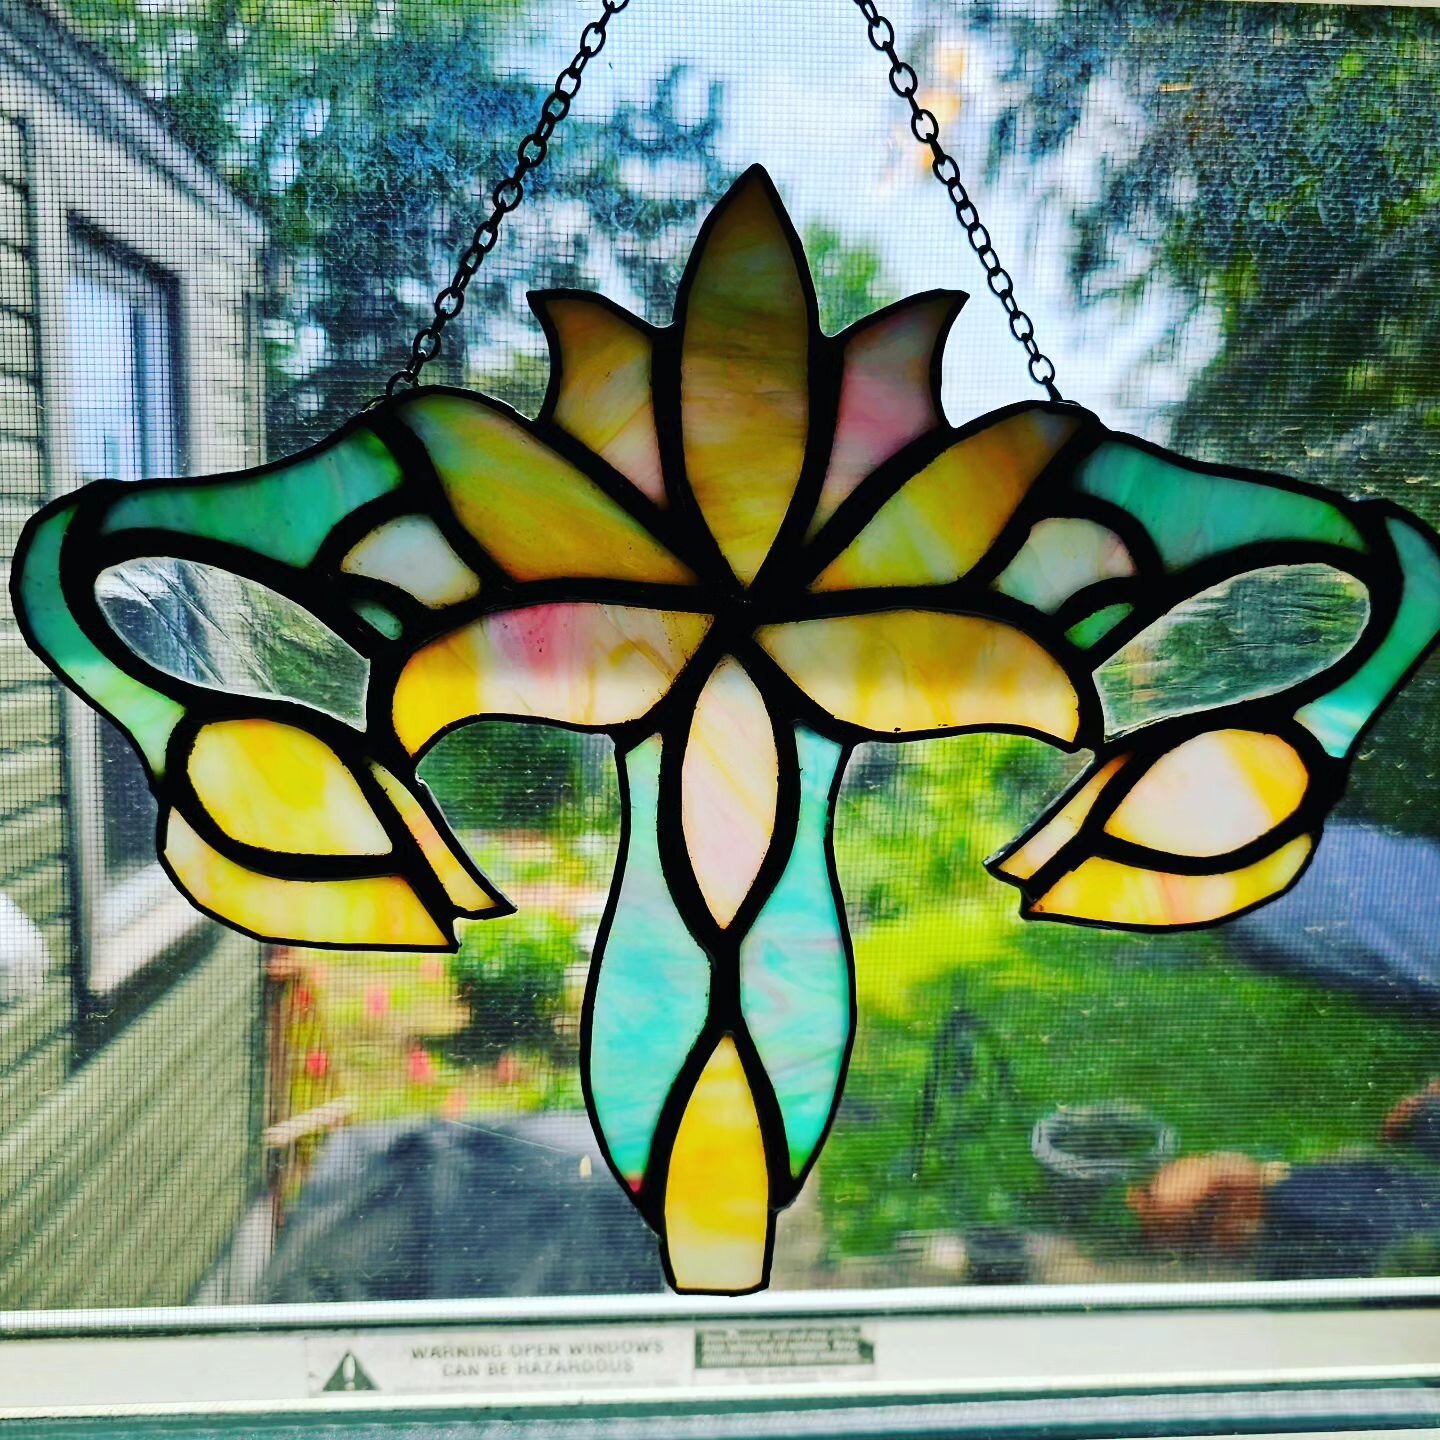 Love my new stained glass piece from @tainted.glass.lou 

I got myself a glass uterus for mother's day.

#stainedglass #louisvilleartist #uterus #uterusesbeforeduderuses #suncatcher #womenartists